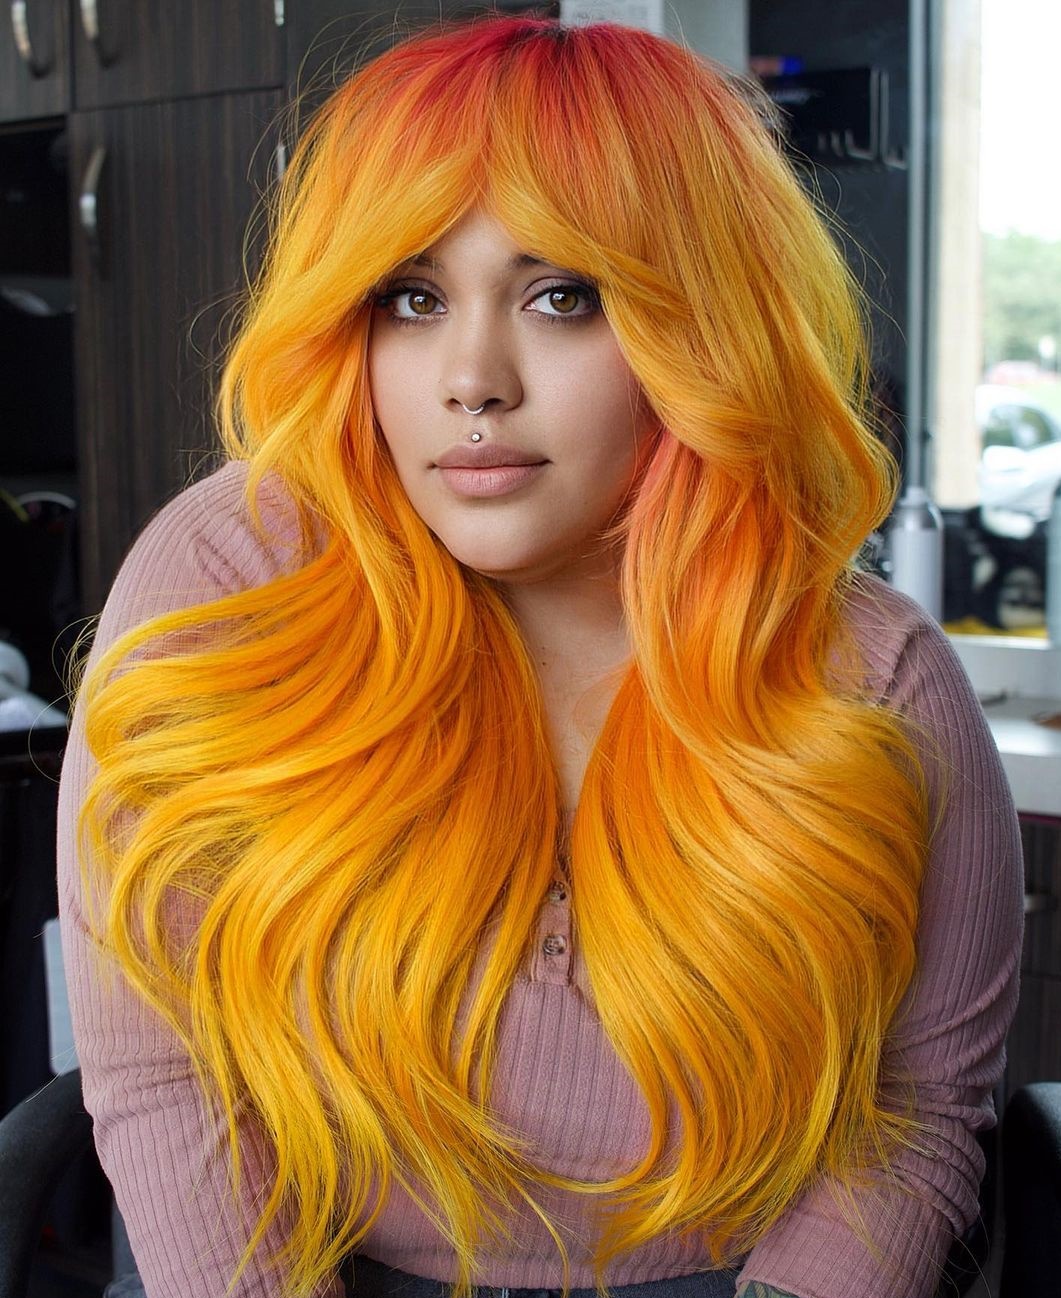 Orange & Yellow Color on Long Thick Hair